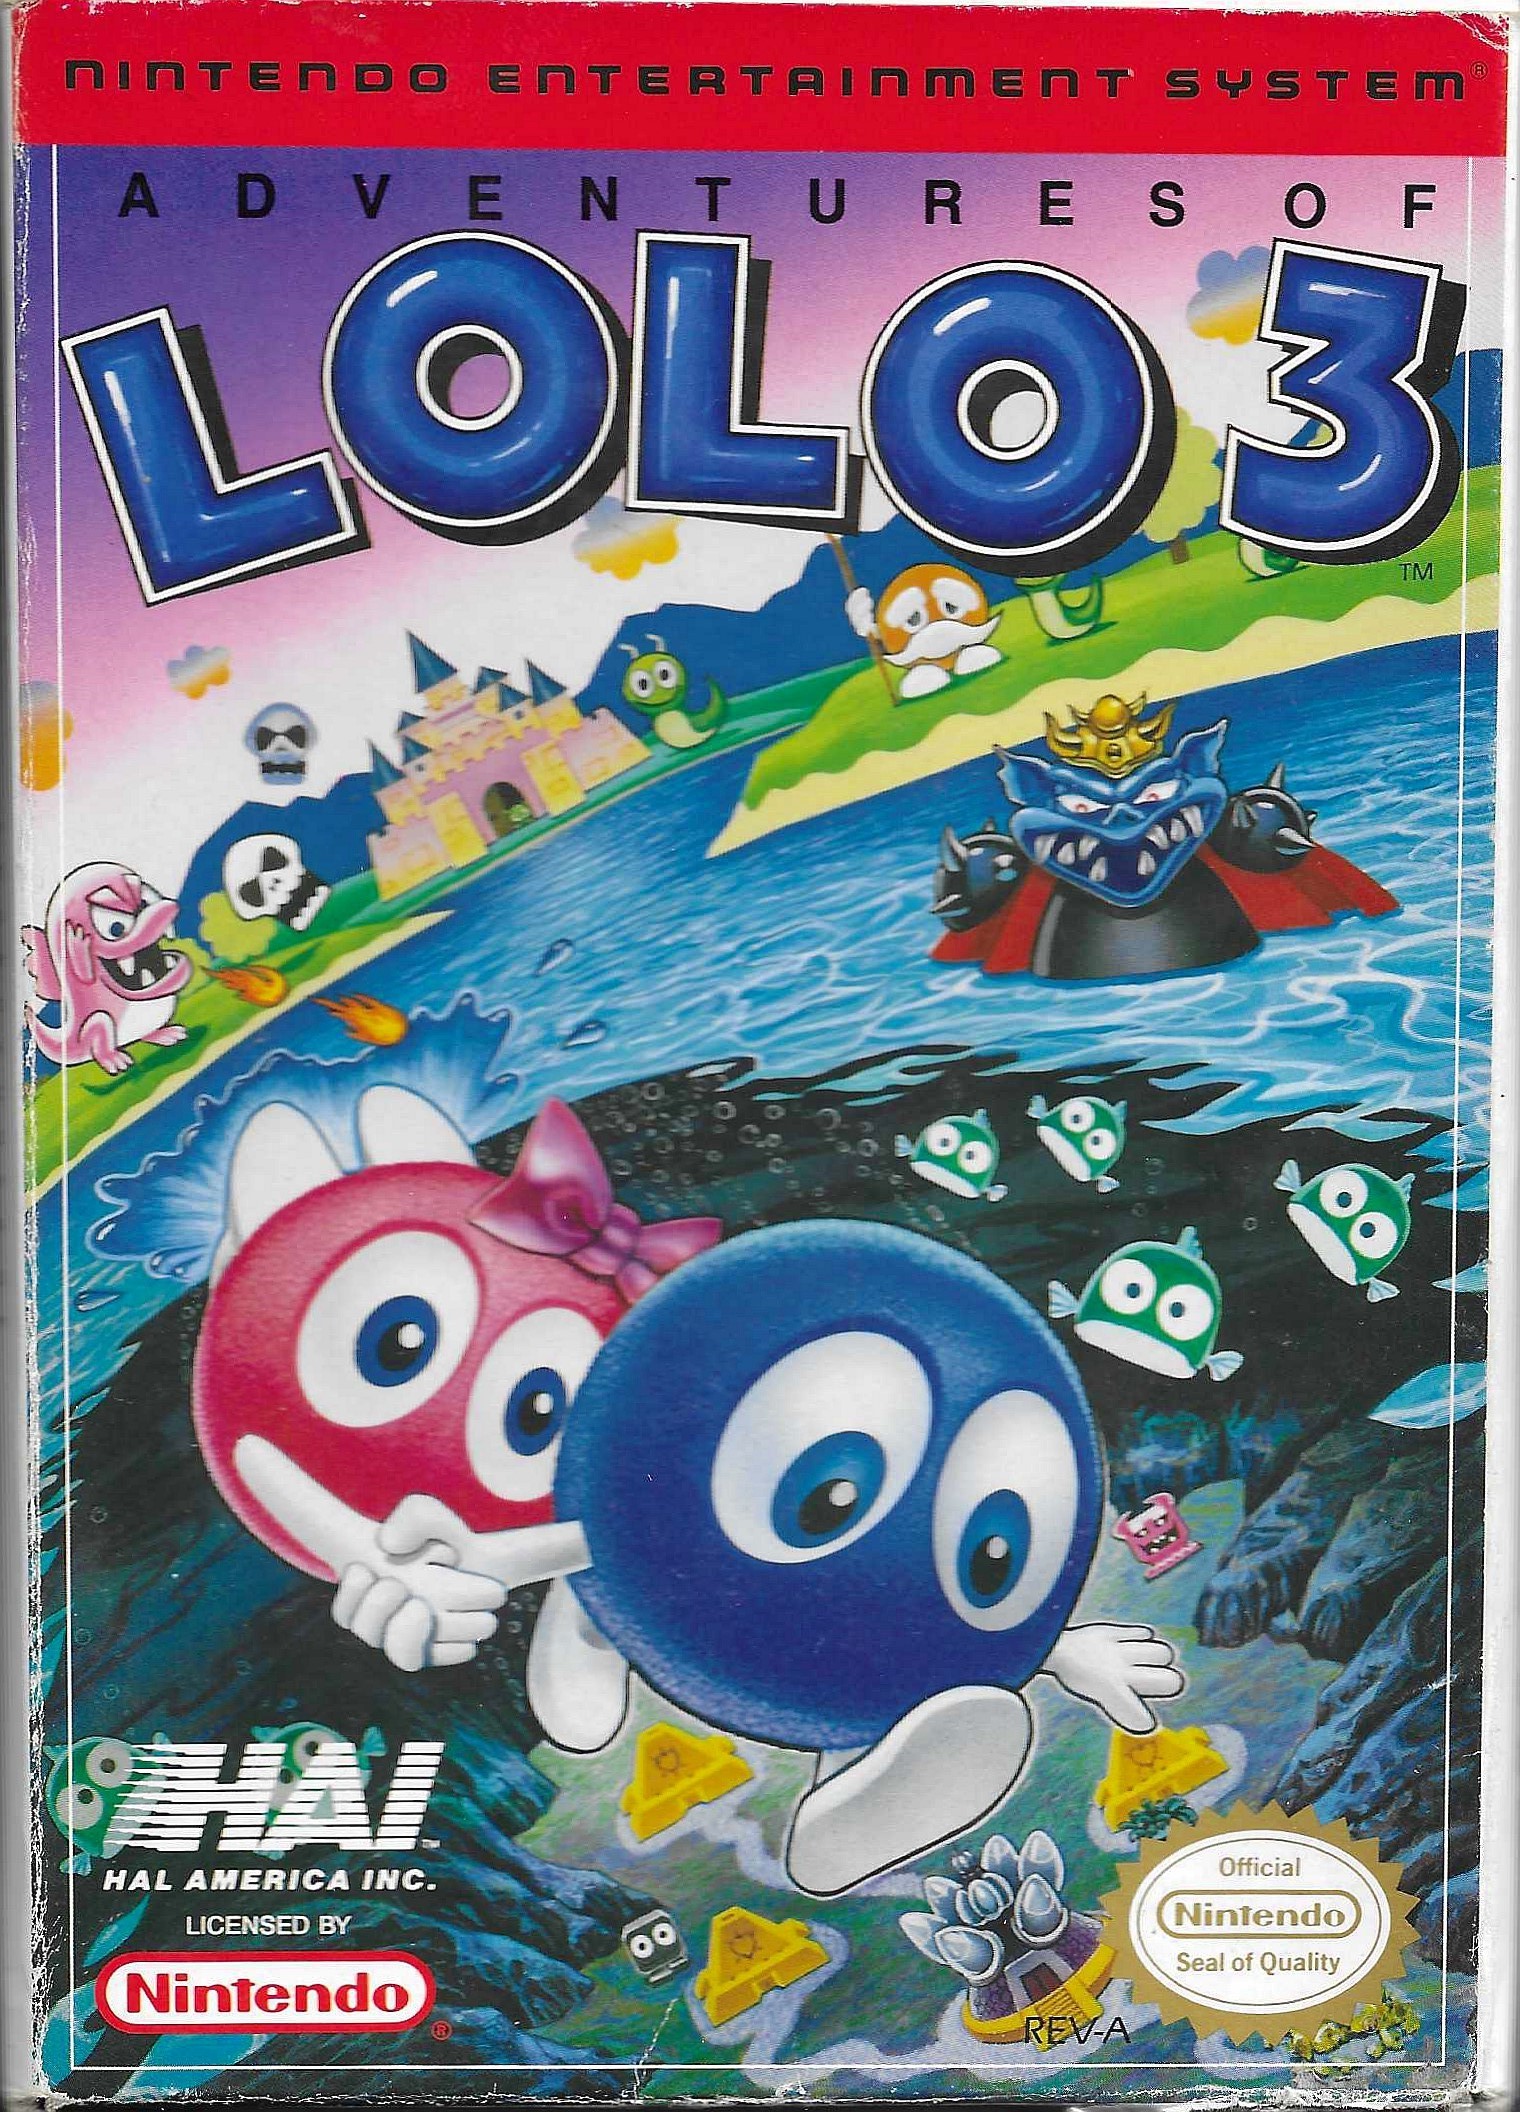 Adventures Of Lolo 3 NES Box and Add-ons (USA)